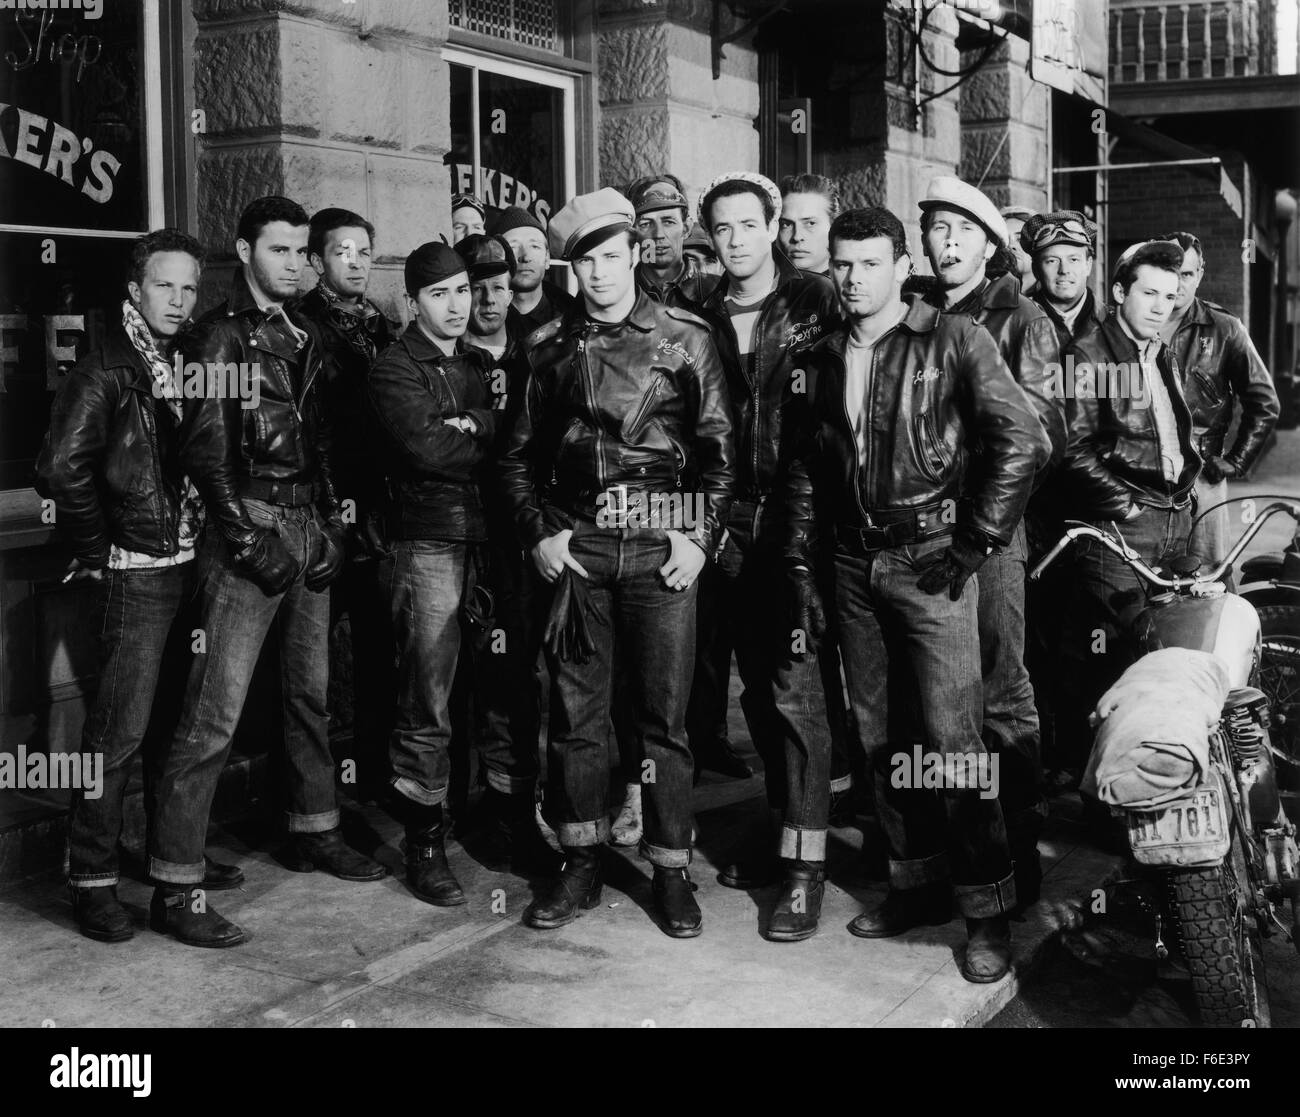 RELEASE DATE: December 30, 1953. MOVIE TITLE: The Wild One. STUDIO: Stanley Kramer Productions. PLOT: A gang of forty motorcyclists, the Black Rebels Motorcycle Club, gate-crash a legitimate motorcycle race. They are eventually thrown out, but one of the gang steals the second prize trophy and gives it to their leader, Johnny. The gang then ride into Wrightsville, where they race up and down the main street before piling into Bleekers - the local bar. The owner of the bar is happy to let the bikers spend their money, so does not support the sheriff's attempt to address any disturbances. Stuck Stock Photo